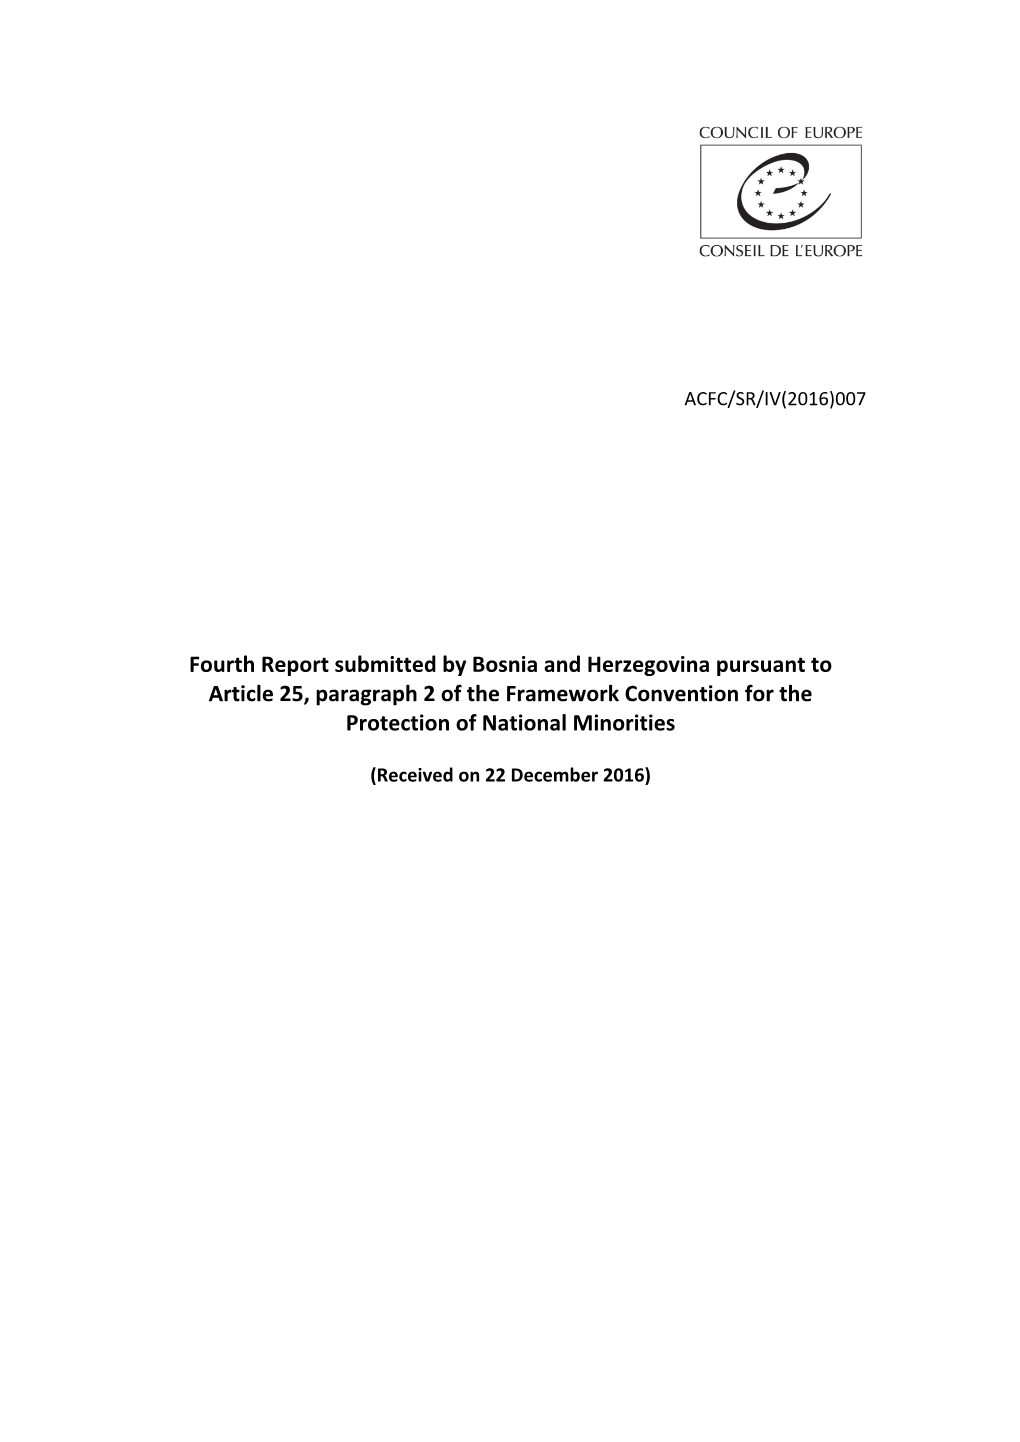 Fourth Report Submitted by Bosnia and Herzegovina Pursuant to Article 25, Paragraph 2 of the Framework Convention for the Protection of National Minorities